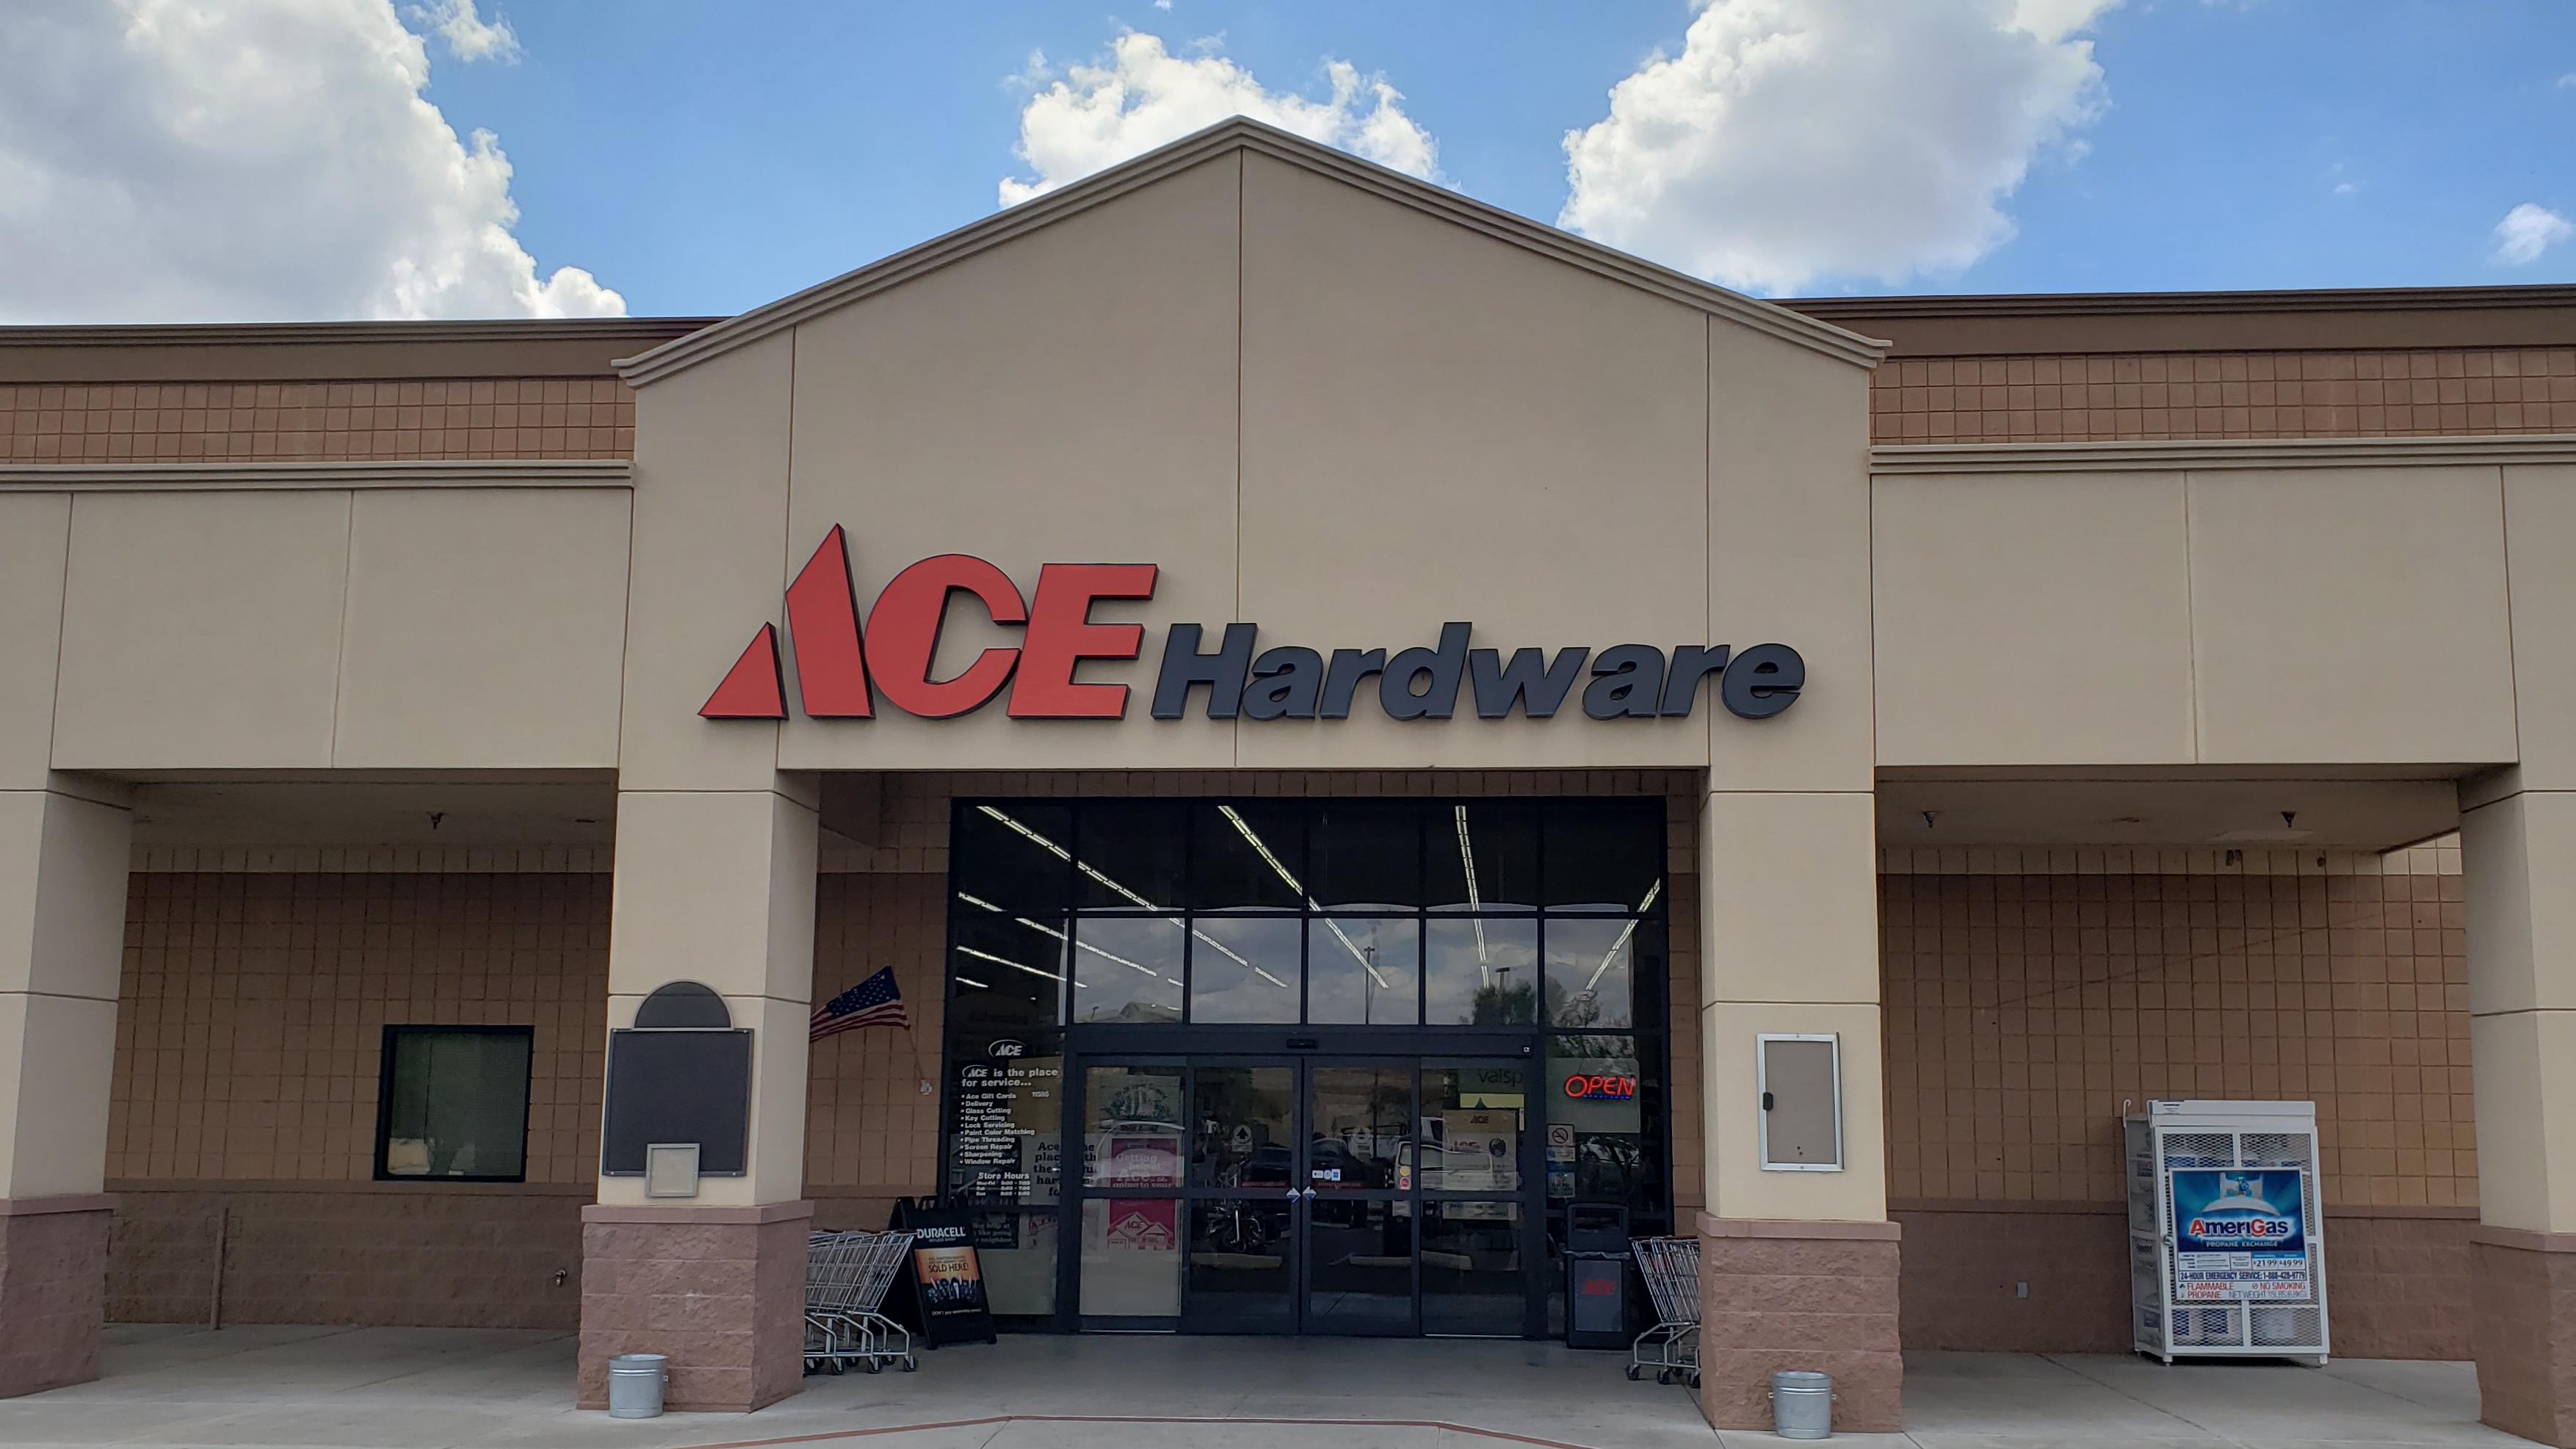 Continental Ranch Ace Hardware/Hardware Stores                                                                                                                                                                                         